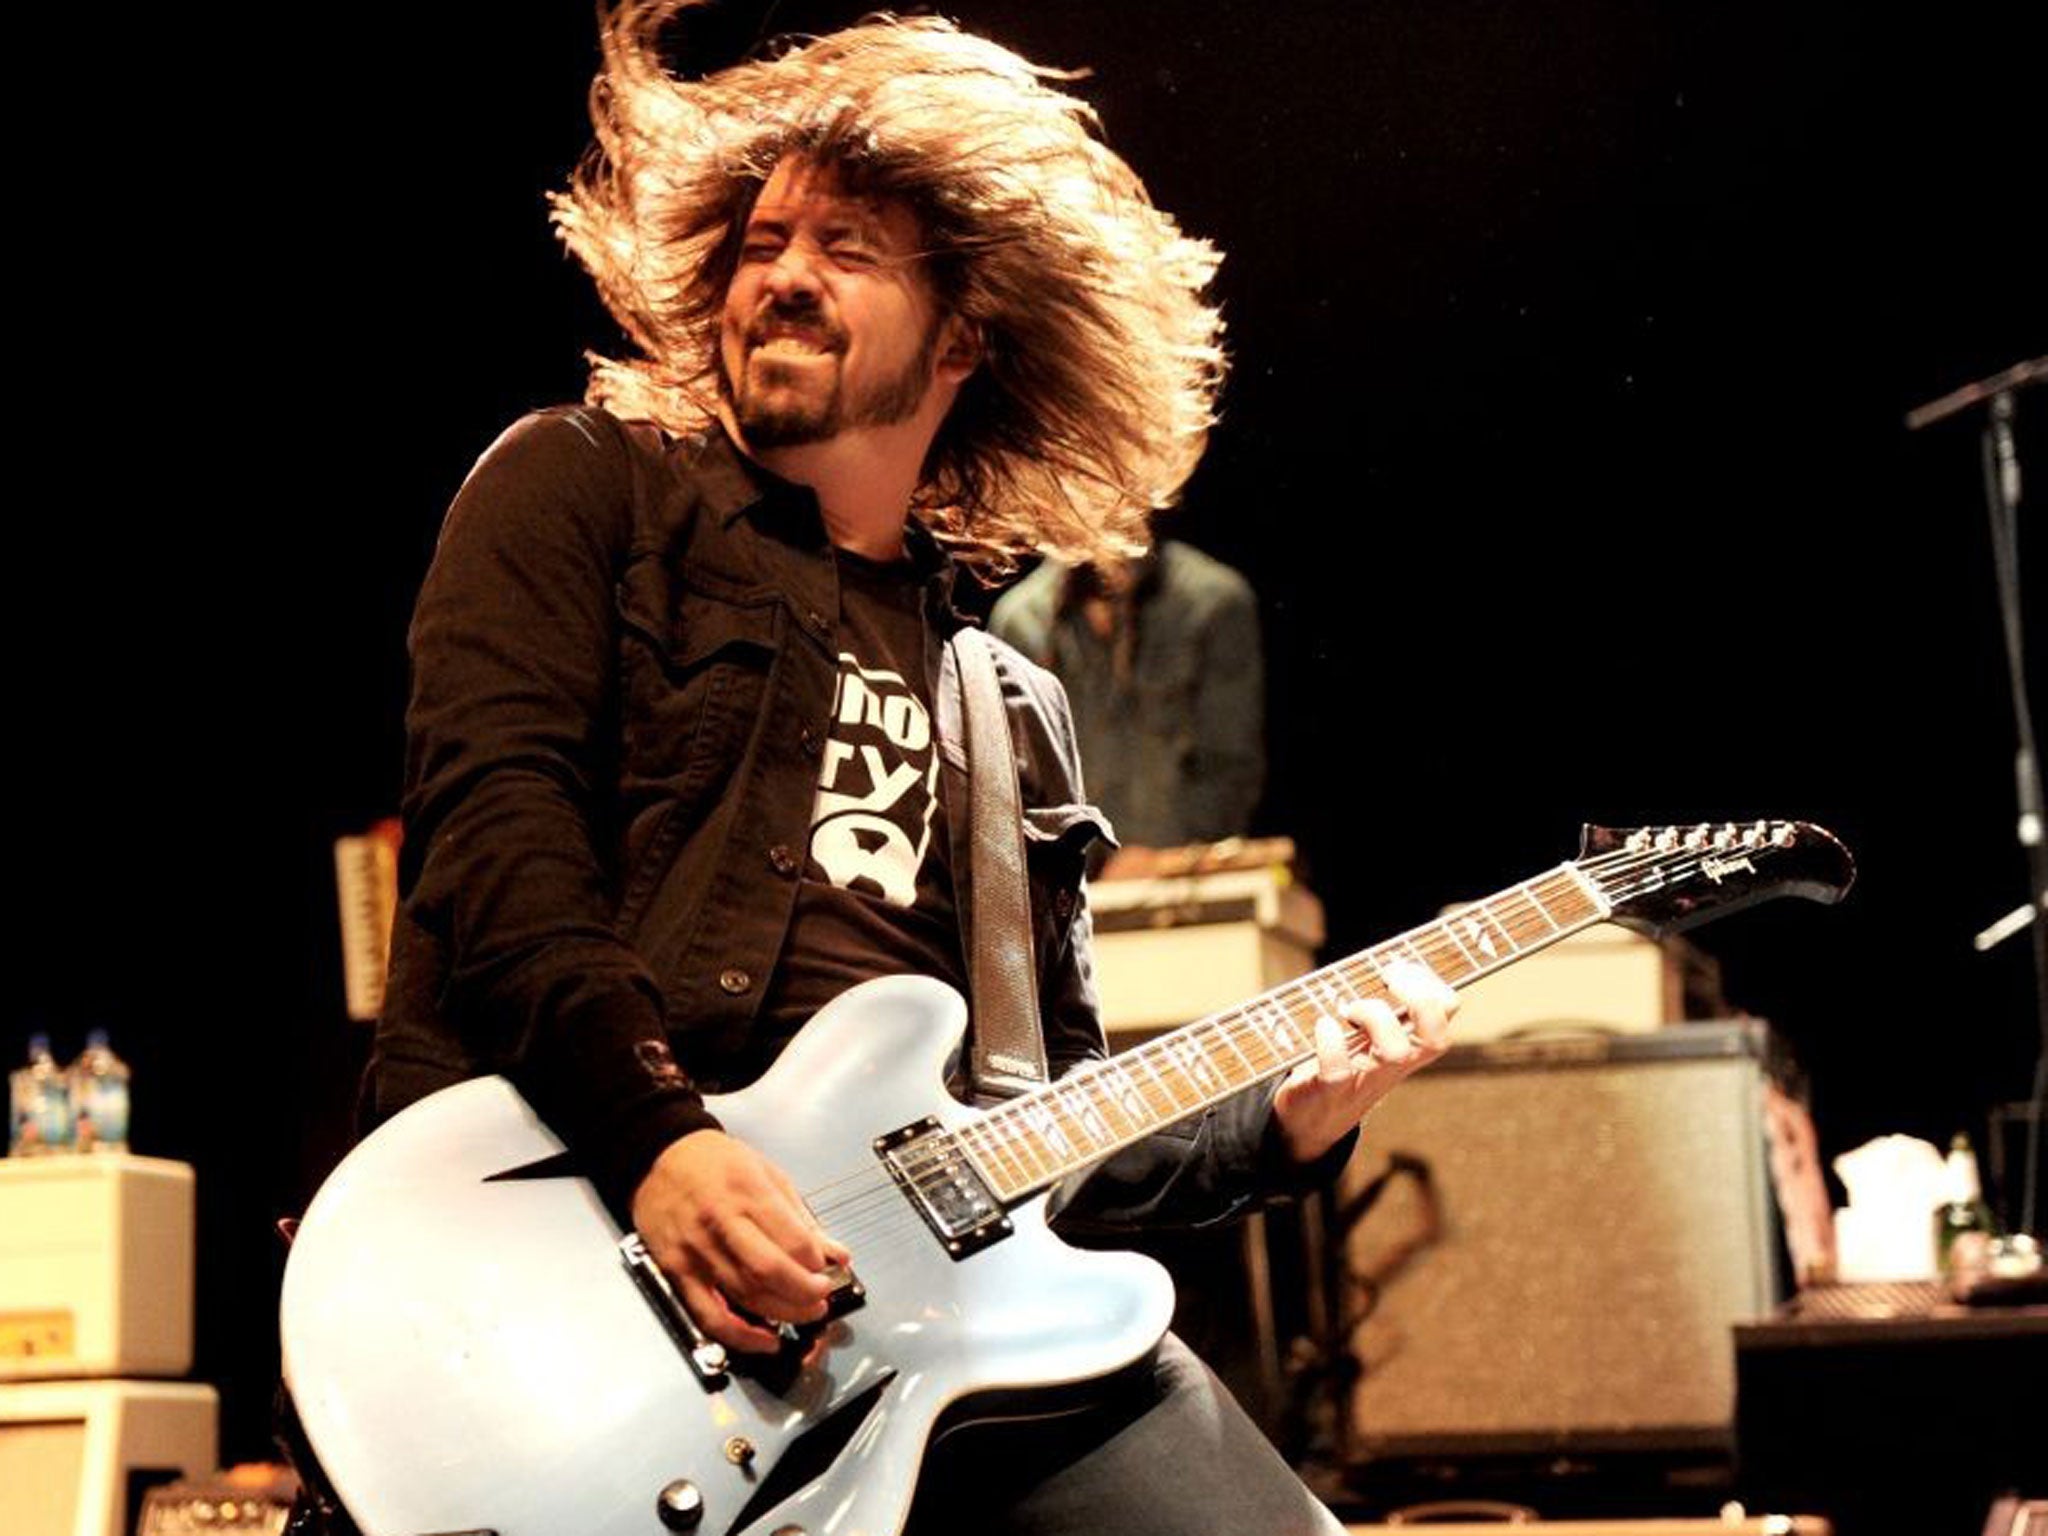 Foo Fighters were booked to headline Glastonbury 2015 on Friday night but cancelled after Dave Grohl broke his leg